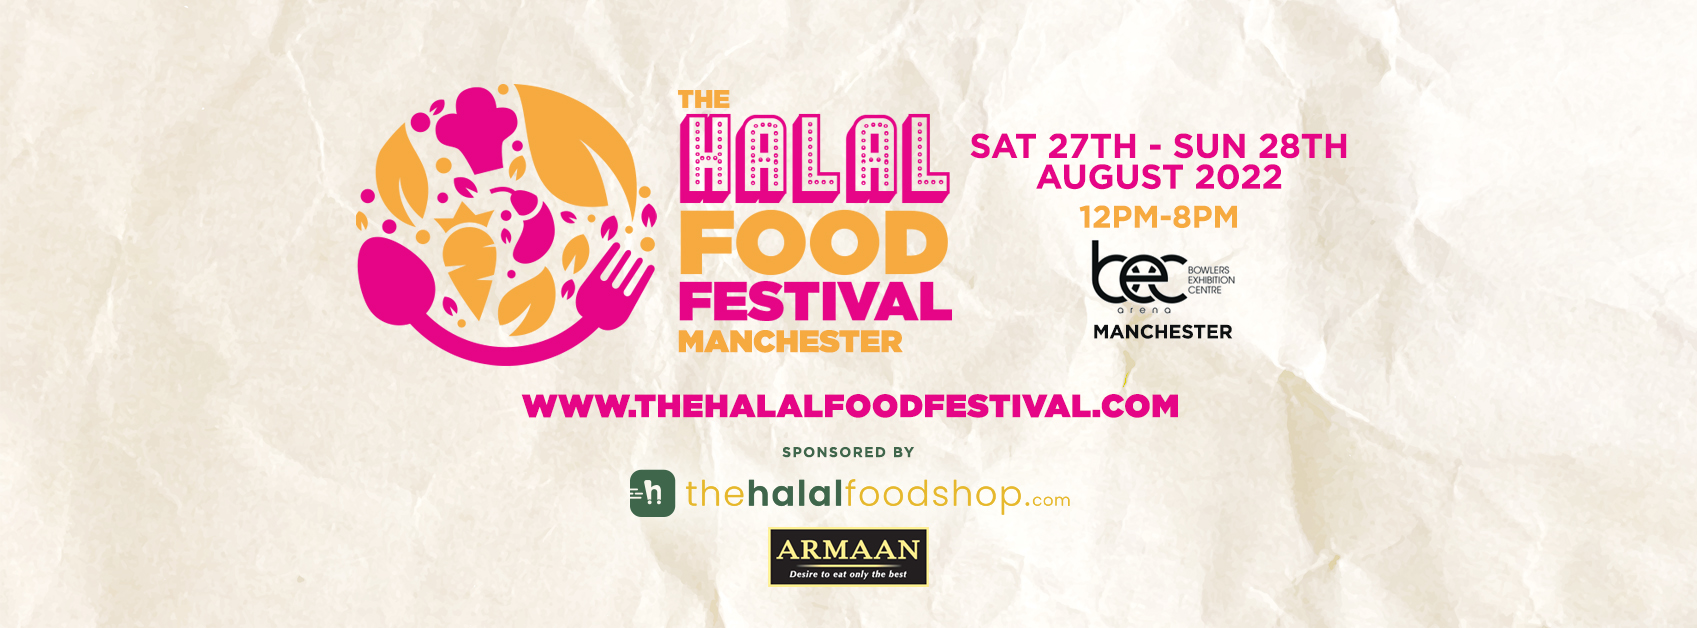 The Halal Food Festival Manchester Over 80 SOLD OUT! at Bowlers